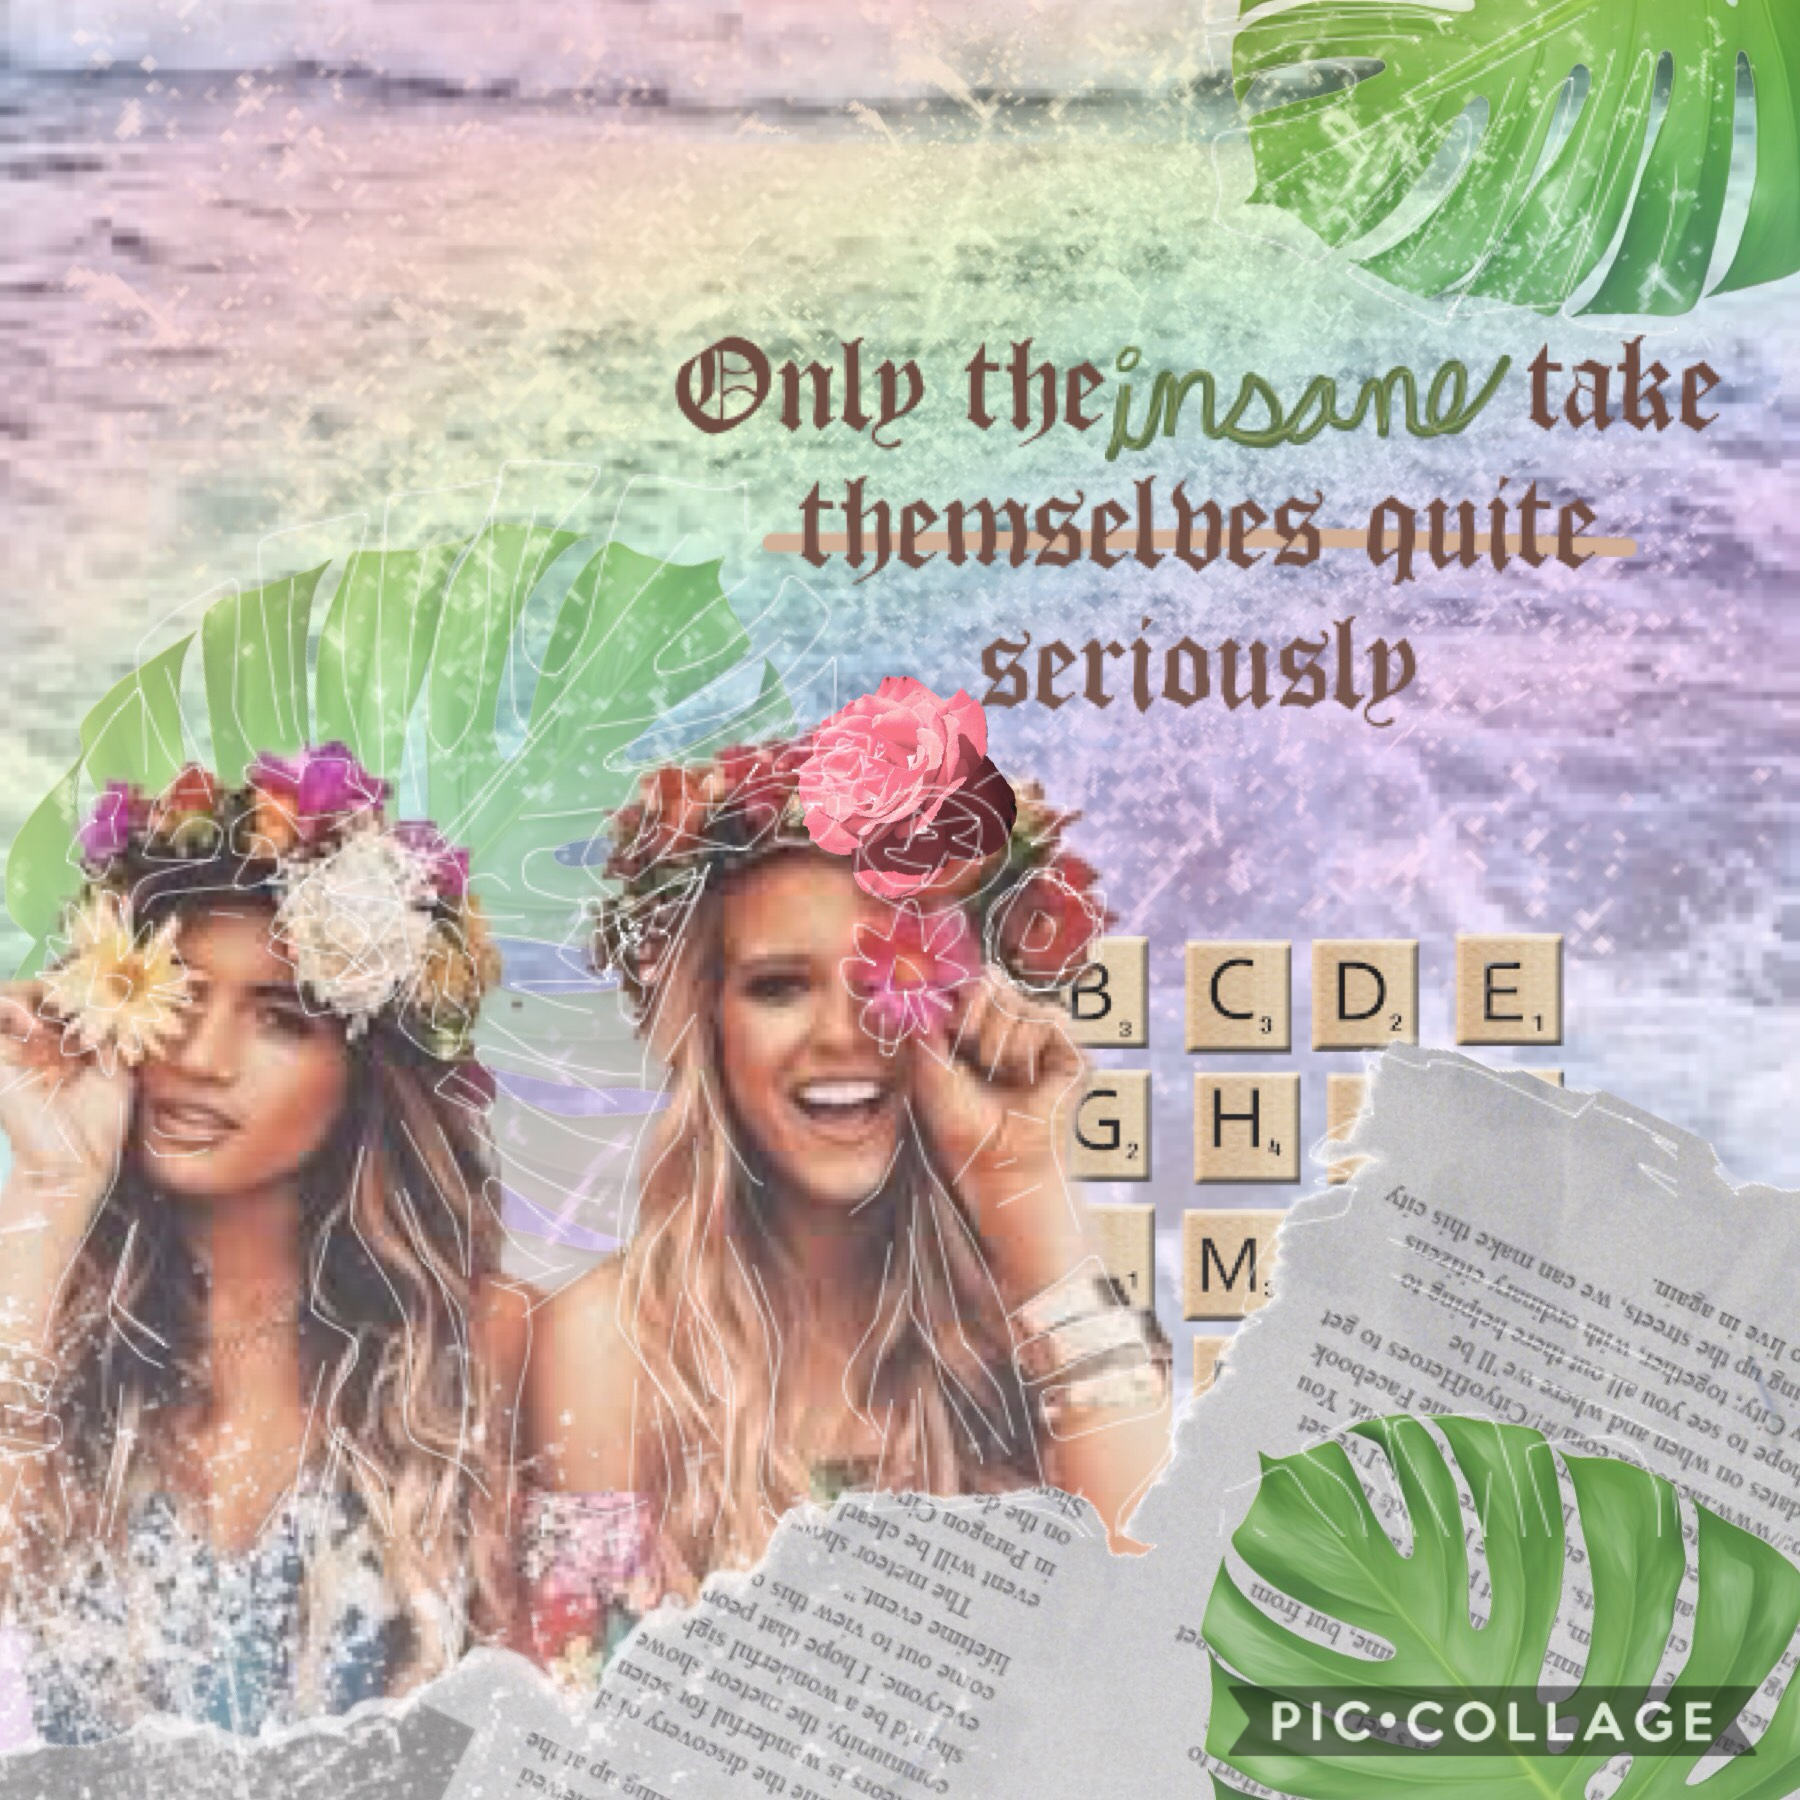 🌿🌸tap🌸🌿

Well idk how I feel about this one it's a bit messy for me. 

I have to much homework in so little time😖anyone want to help me lol

I think I'm going to start a blue and grey theme after this collage. We'll see